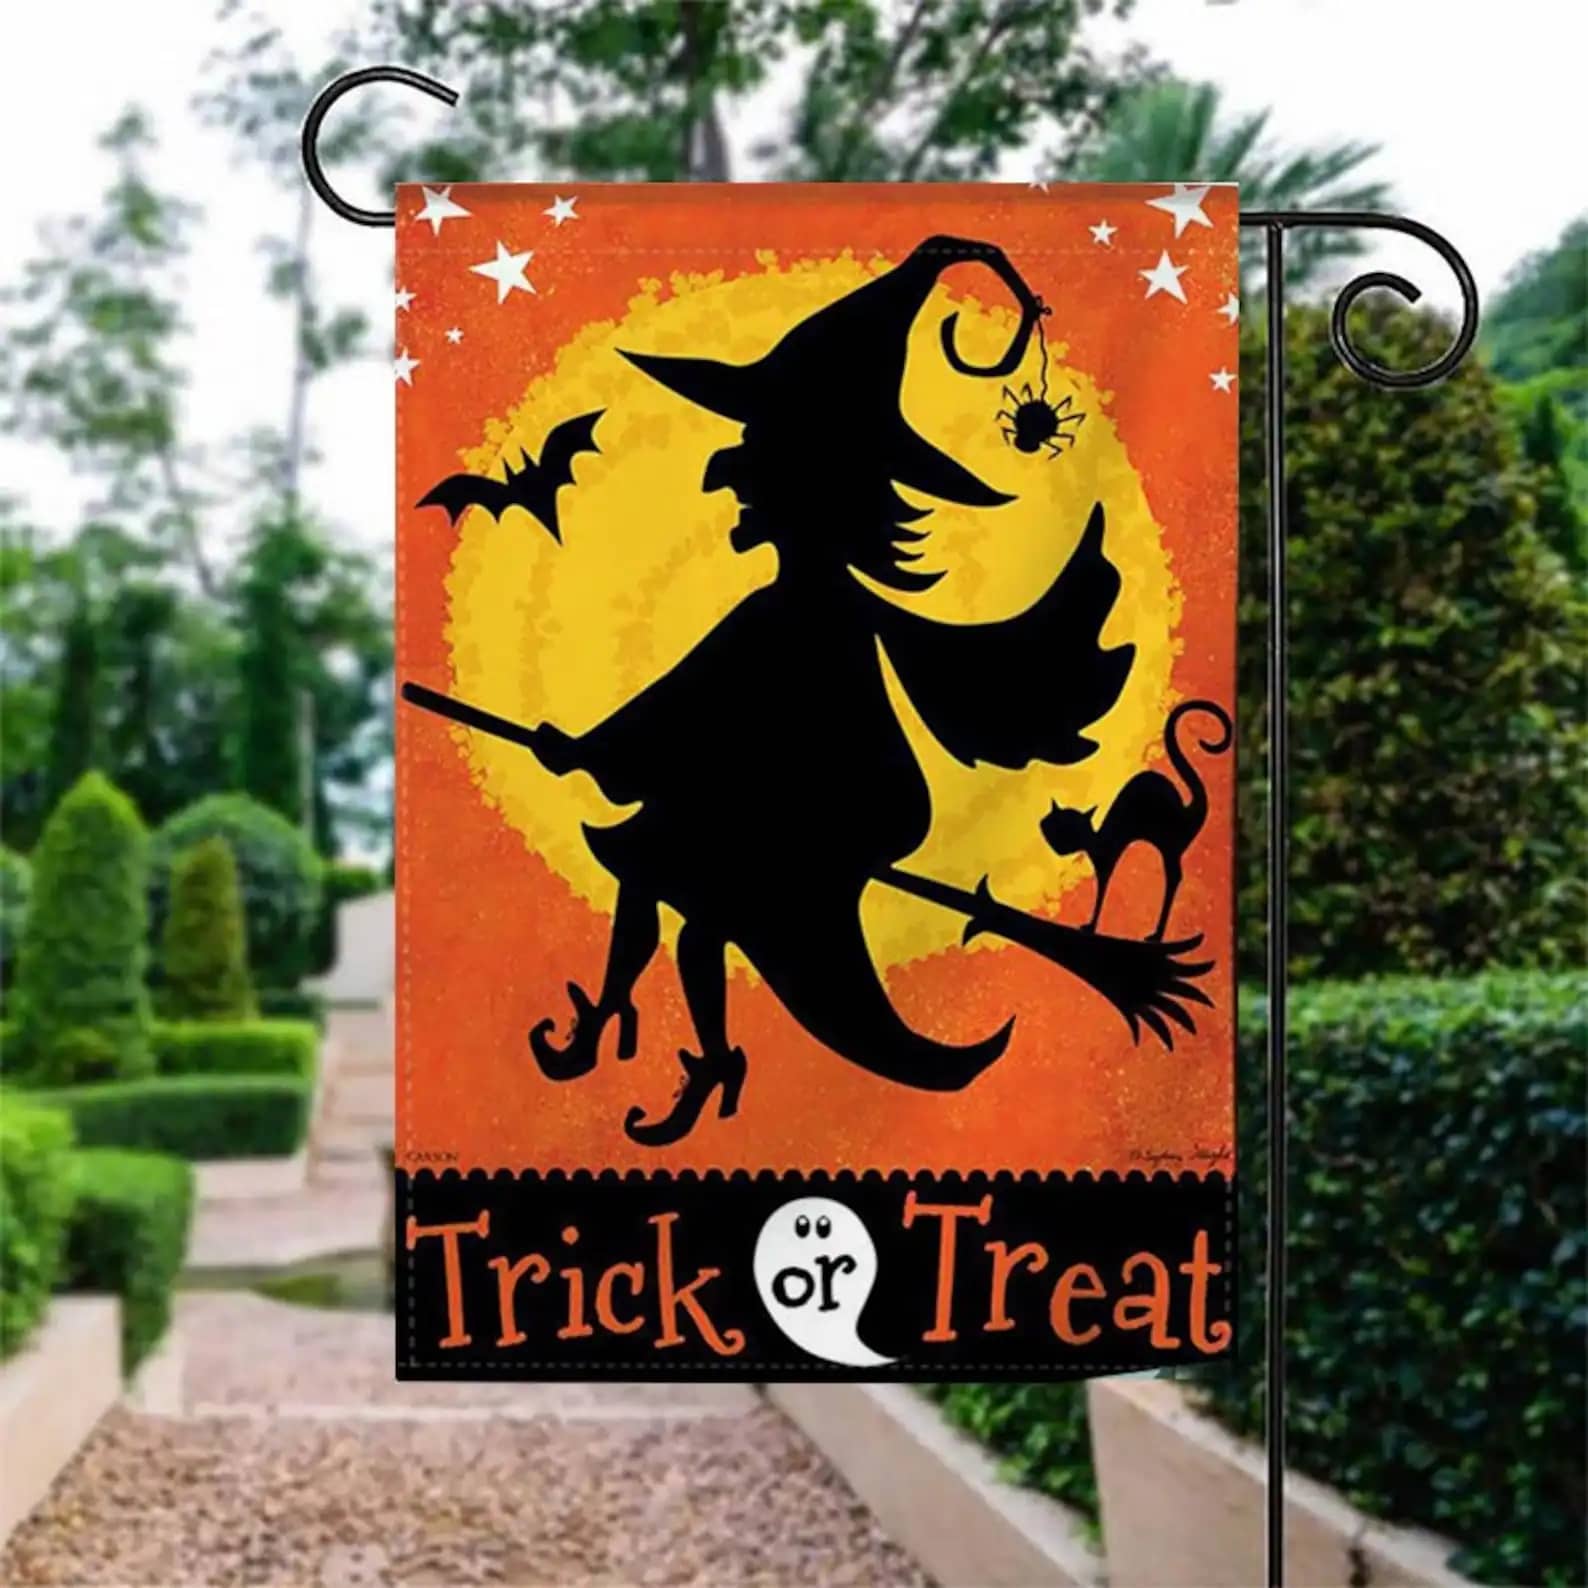 Trick Or Treat Come And Eat Our Grilled Pig'S Feet Happy Halloween Decoration Garden Flag